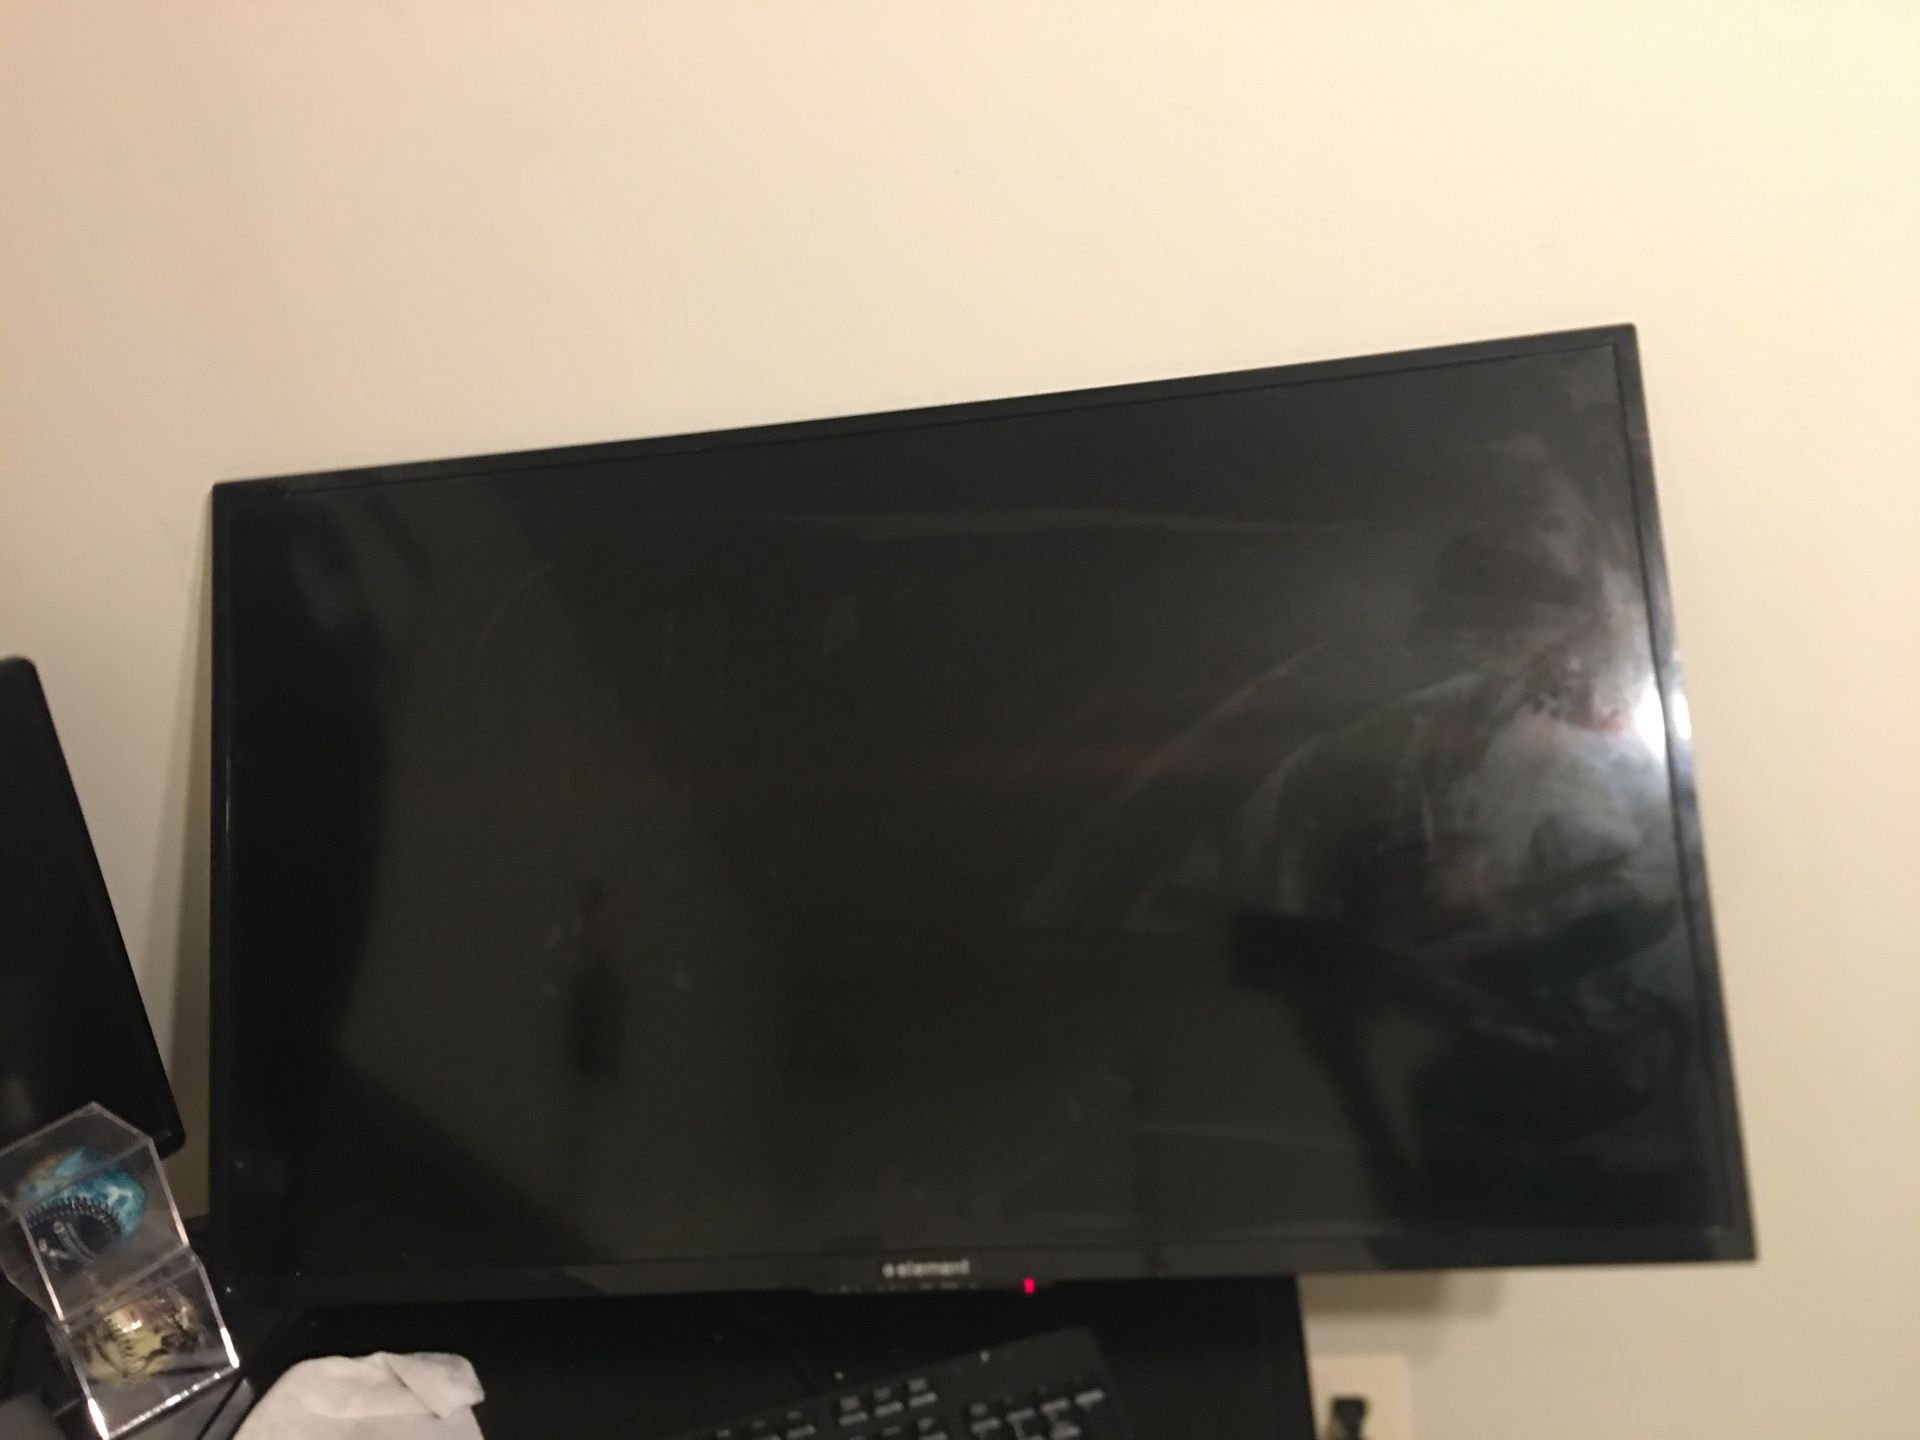 Element tv 41 inch has no stand